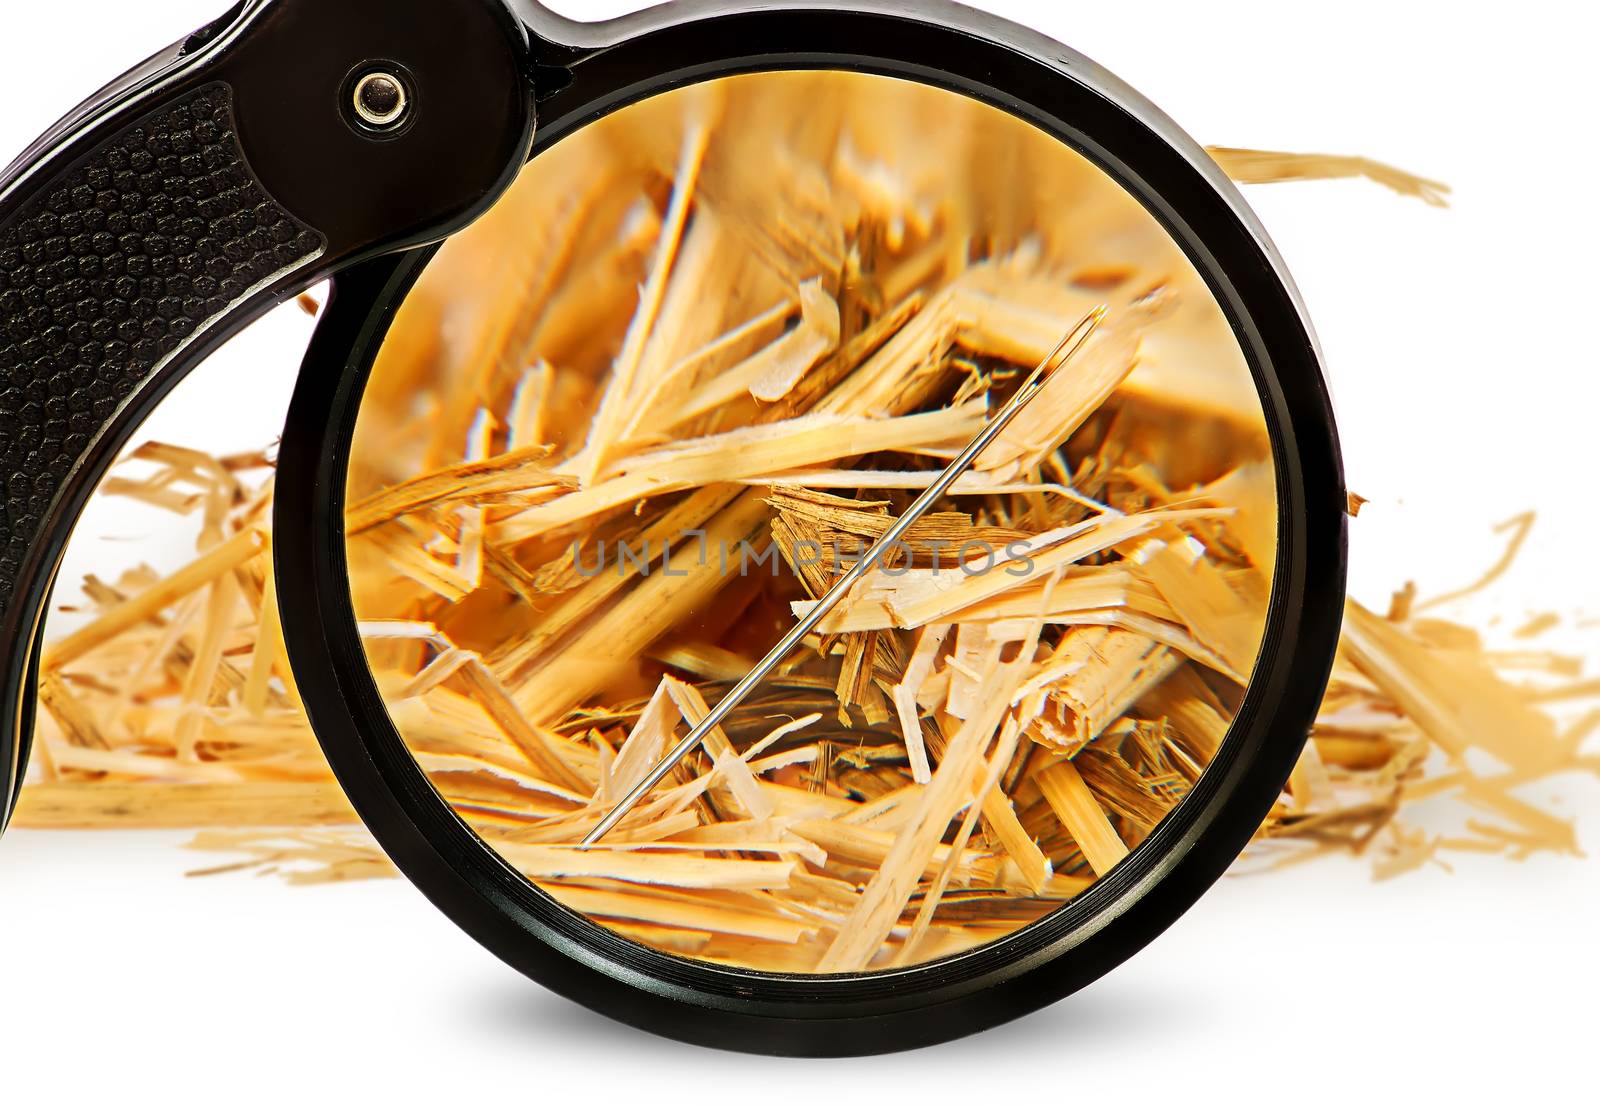 Magnifier enlarges a needle in haystack by Cipariss